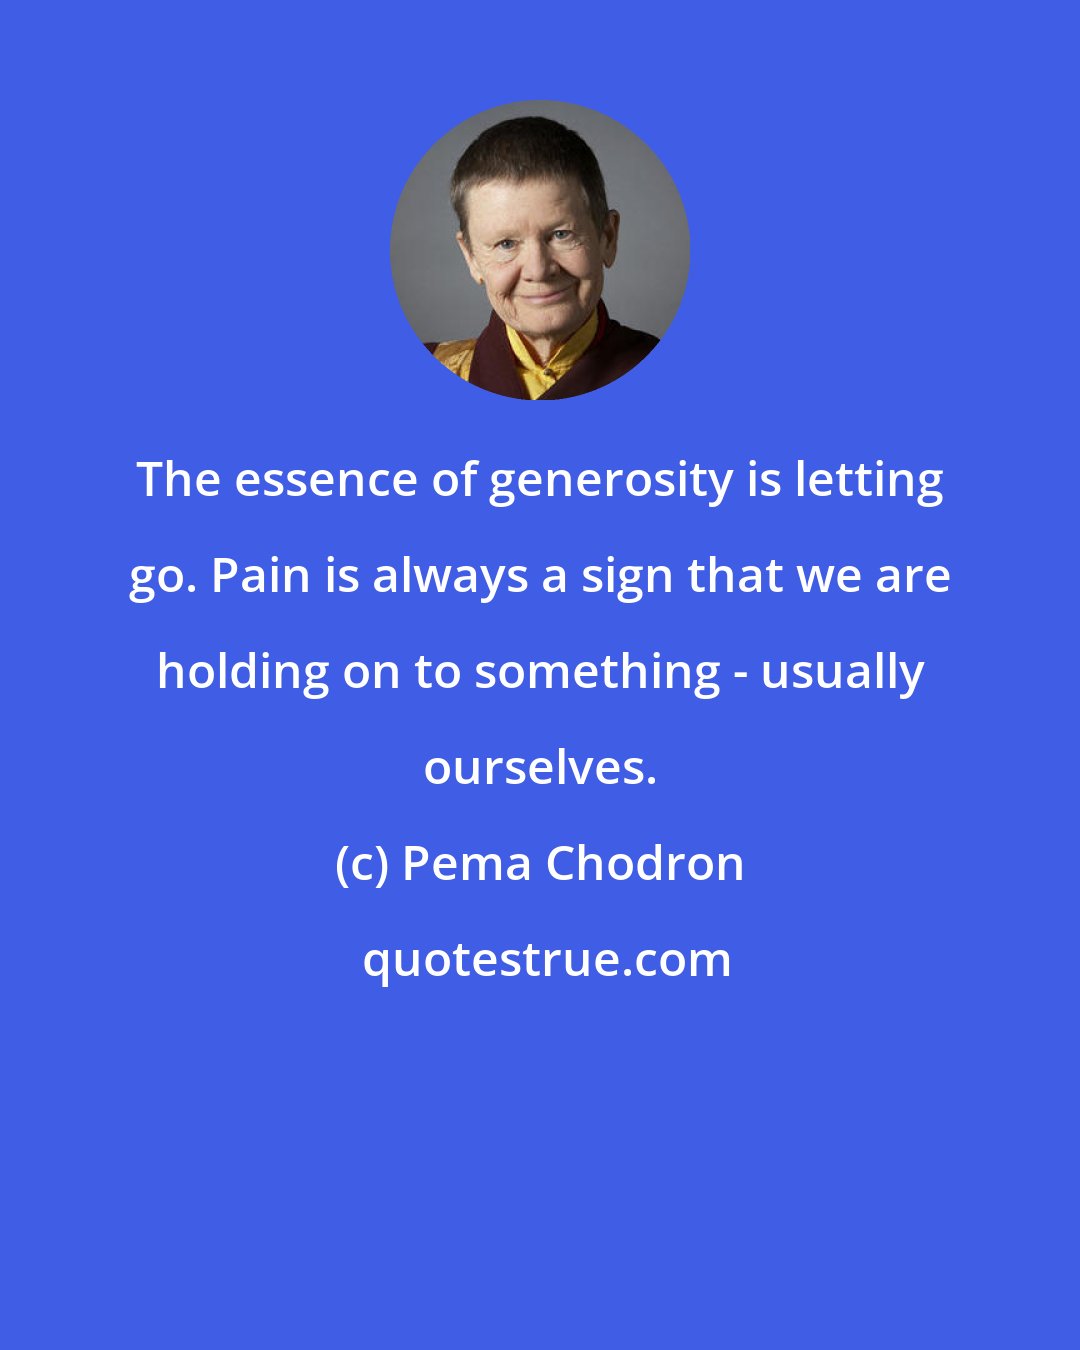 Pema Chodron: The essence of generosity is letting go. Pain is always a sign that we are holding on to something - usually ourselves.